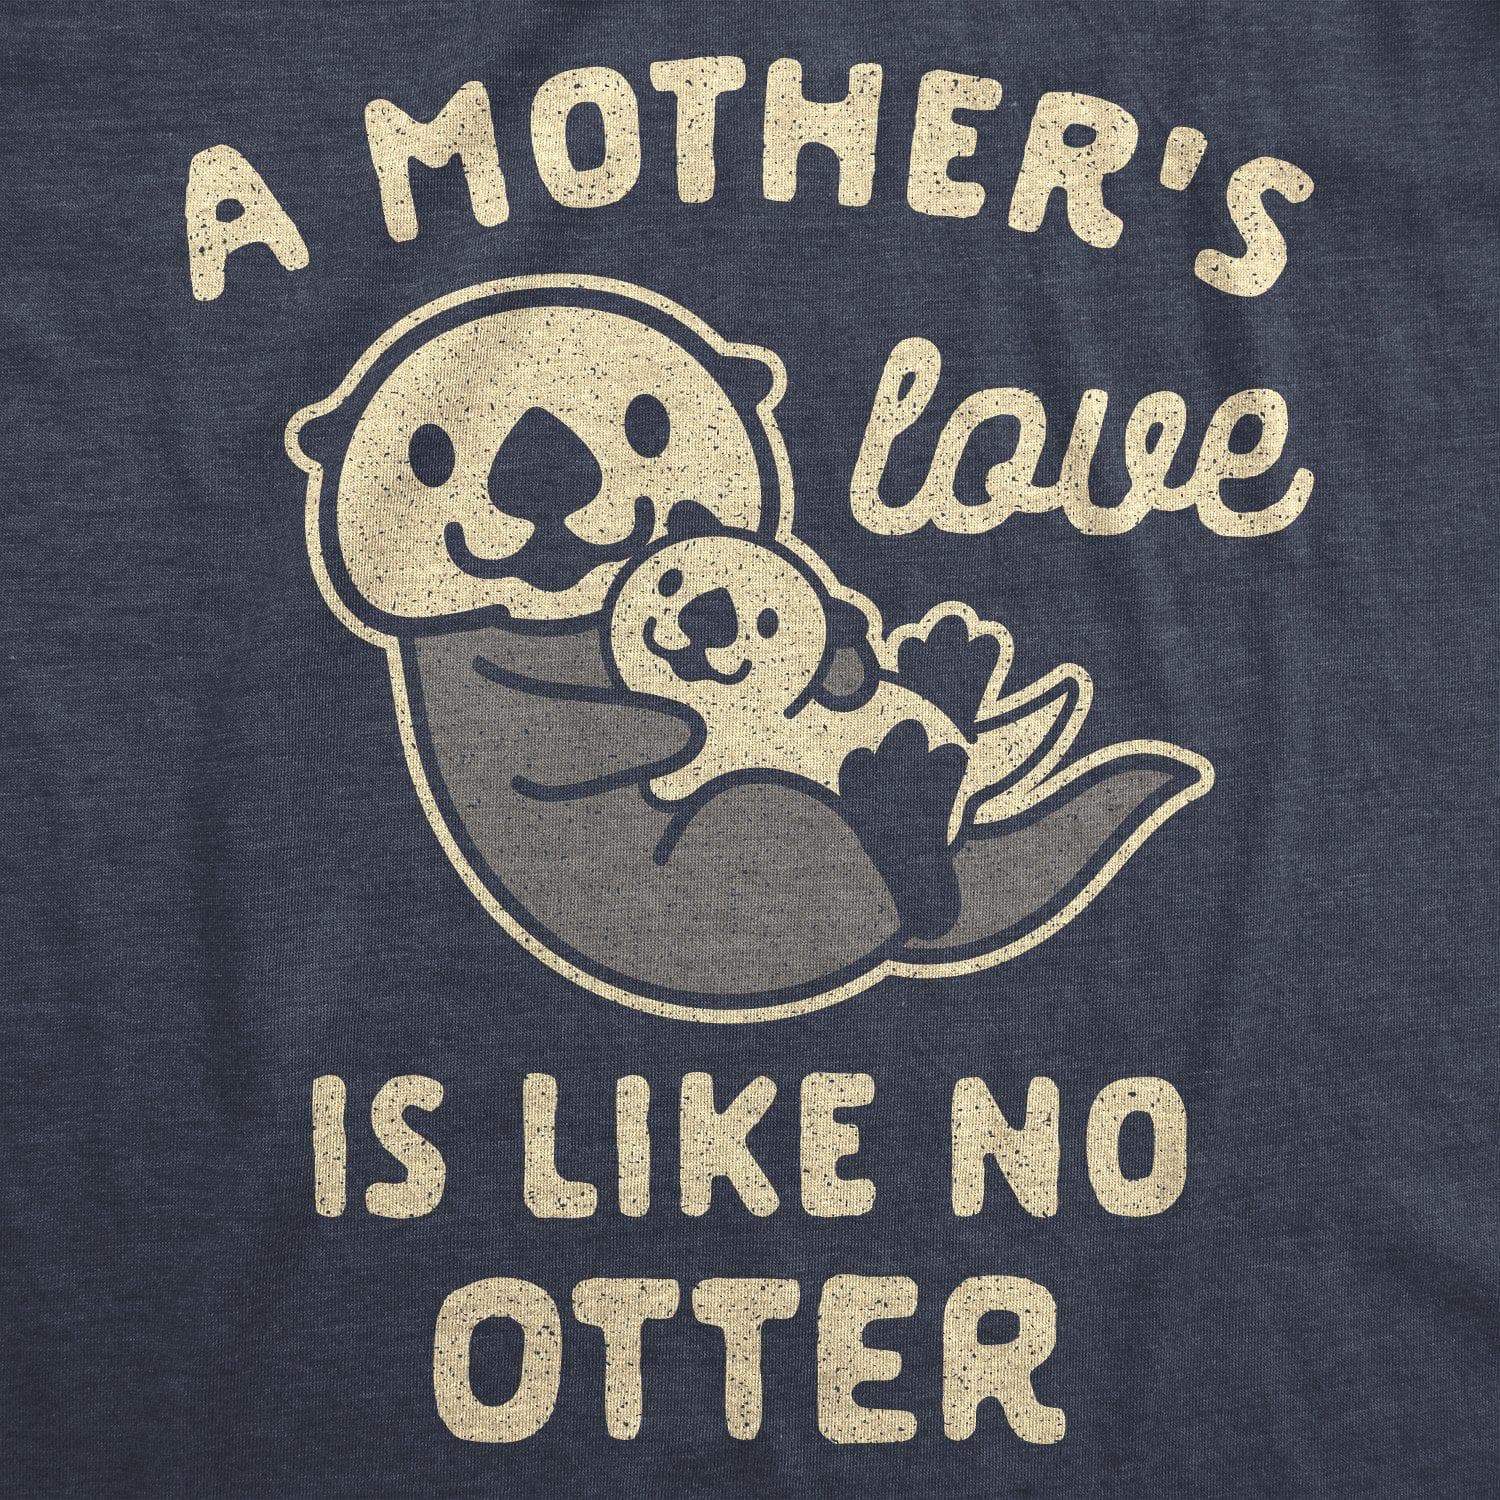 A Mother's Love Is Like No Otter Women's Tshirt - Crazy Dog T-Shirts